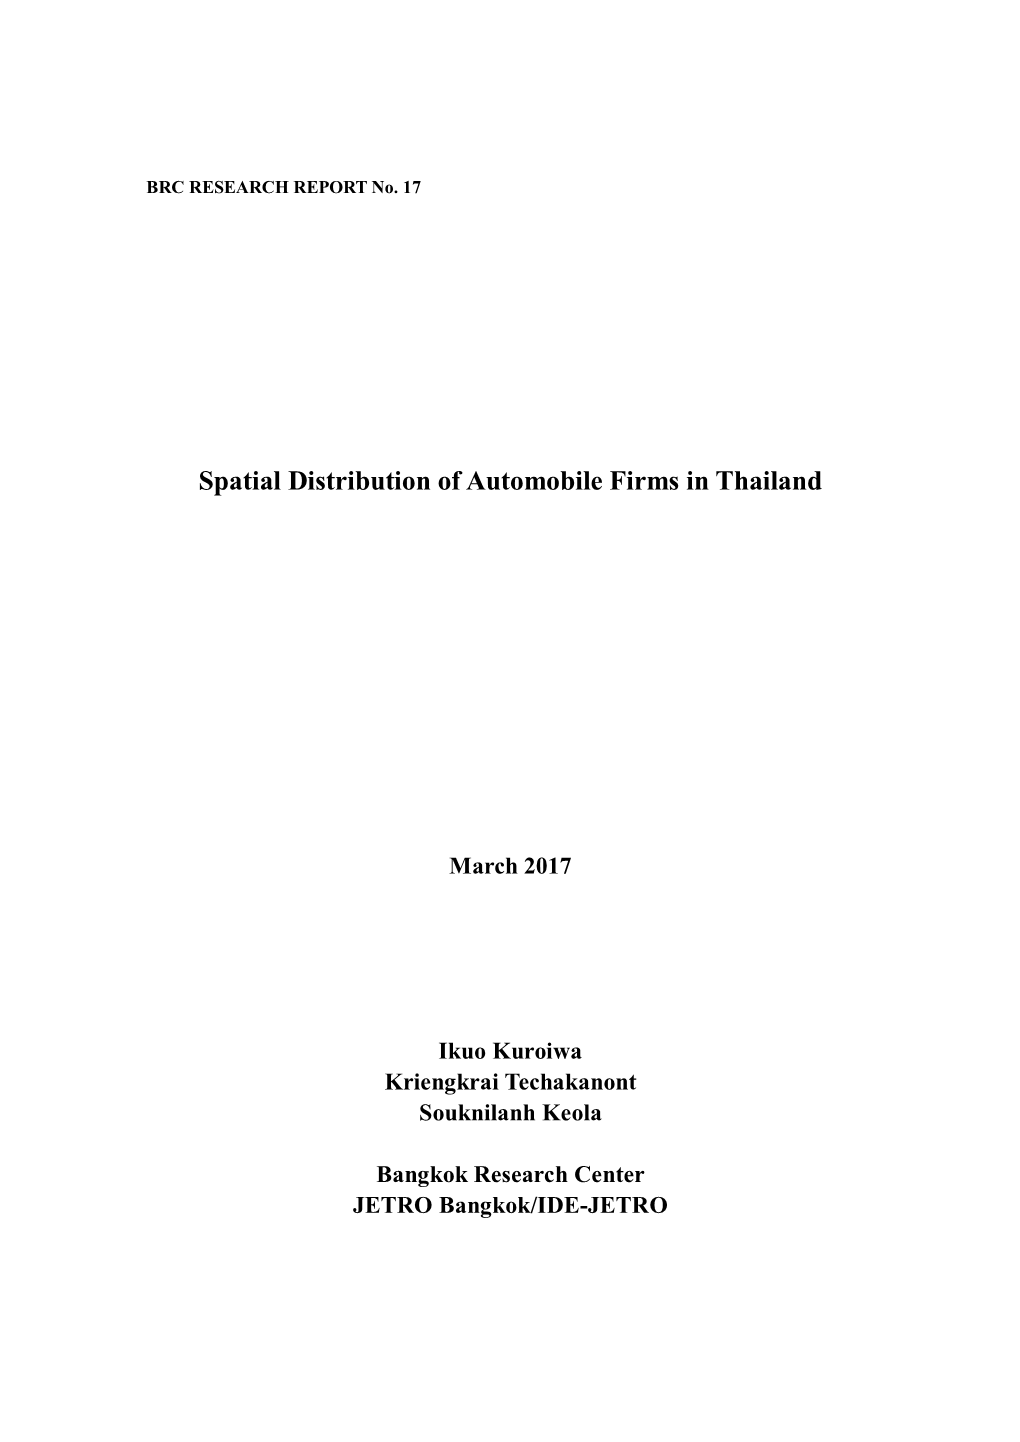 Spatial Distribution of Automobile Firms in Thailand